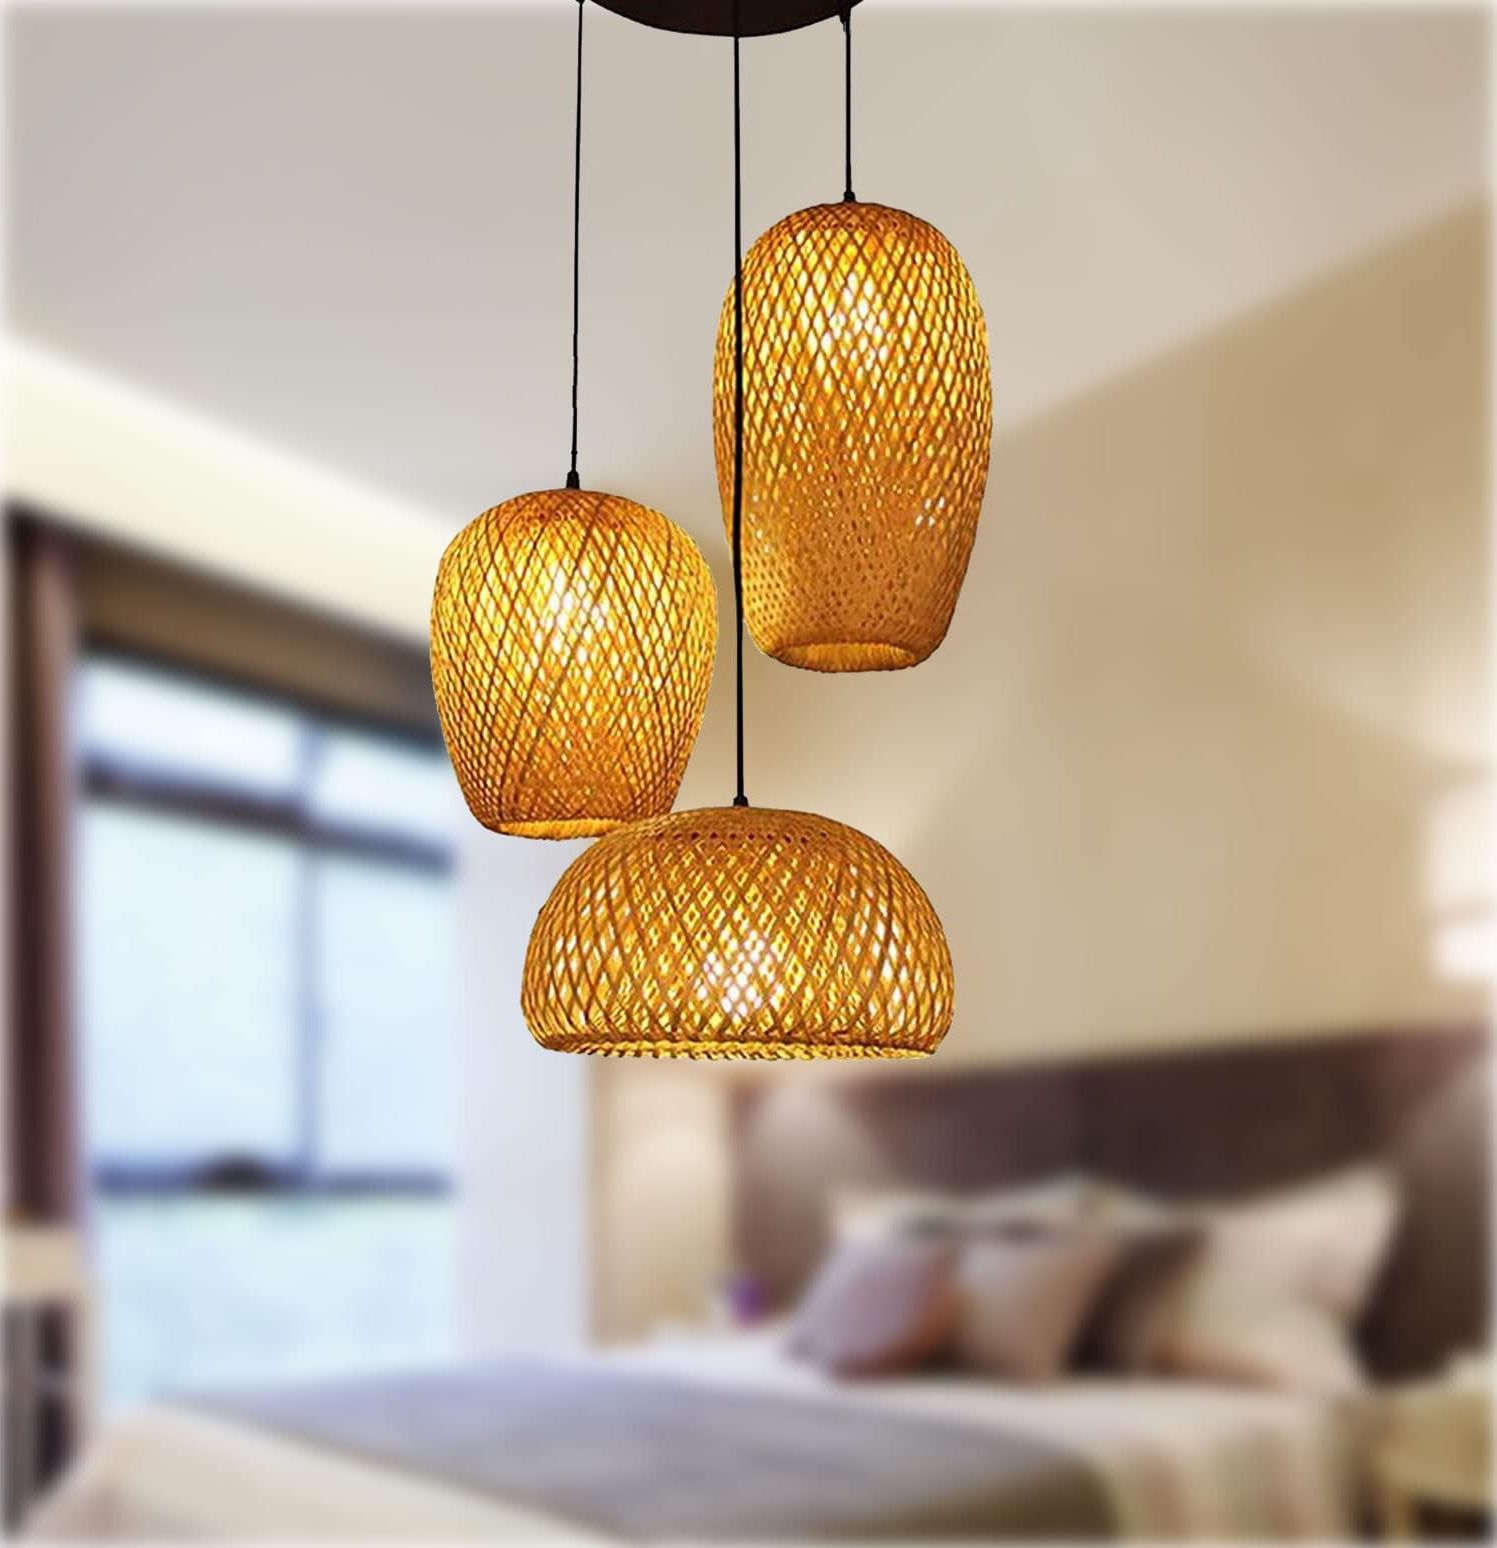 Best And Newest Bamboo Lantern Pendant Lam,bamboo Light Fixture, 3 Headlights Retro Style  E26/e27 Natural Rattan Handmade Woven Pendant Light Chandelier Ceiling  Lighting Fixture Lamp Shade For Living Room Bedroom – – Amazon With Regard To Rattan Lantern Chandeliers (View 7 of 15)